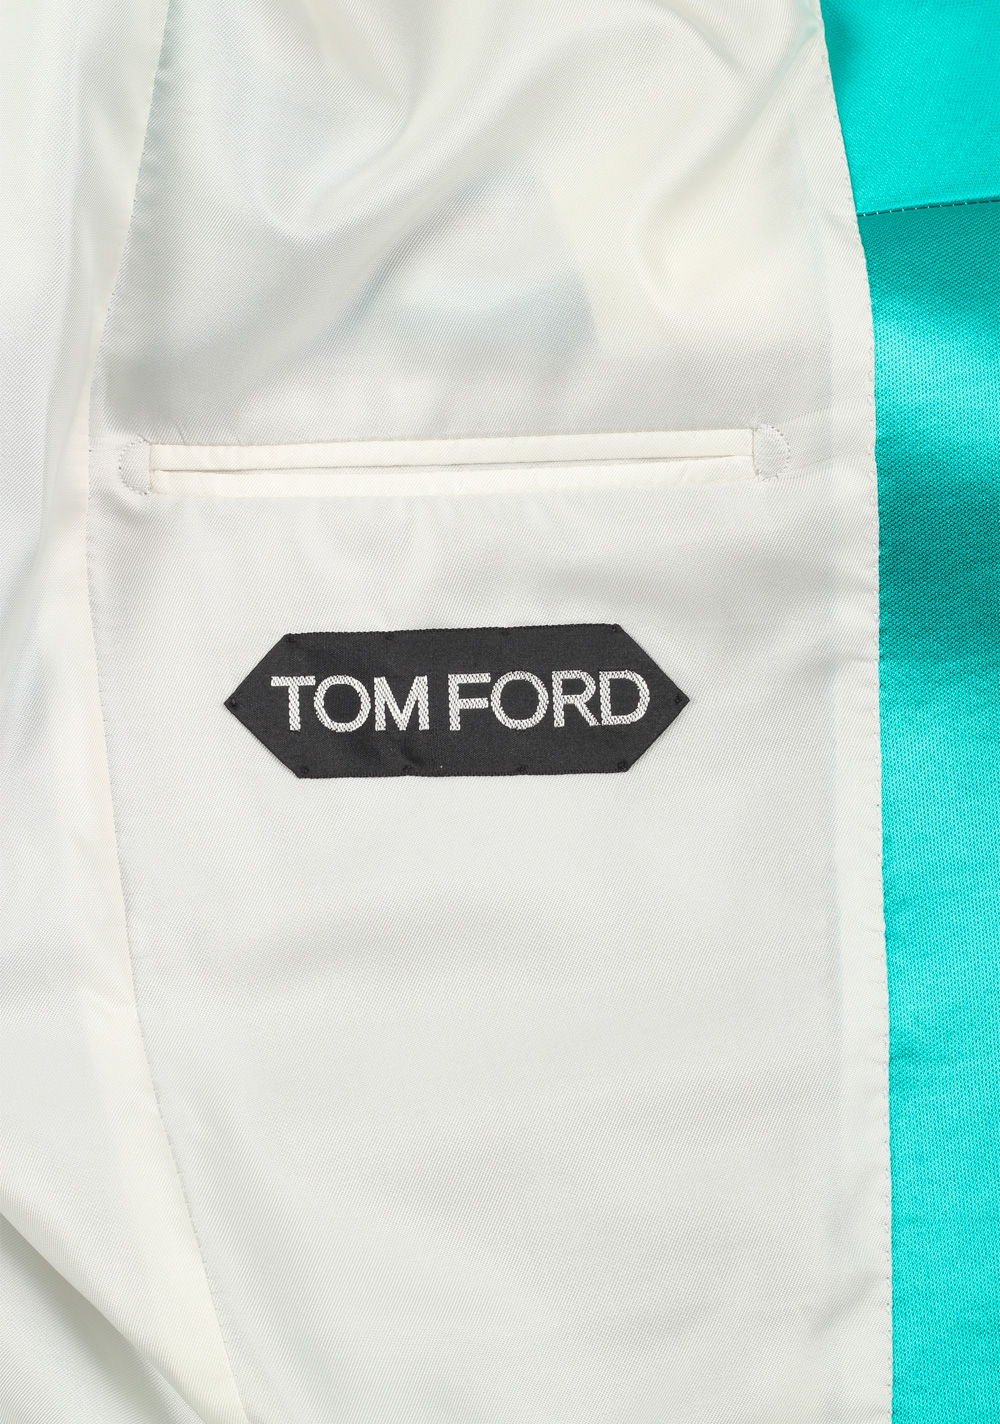 TOM FORD Atticus Turquoise Tuxedo Dinner Jacket Size 46 / 36R U.S. | Costume Limité